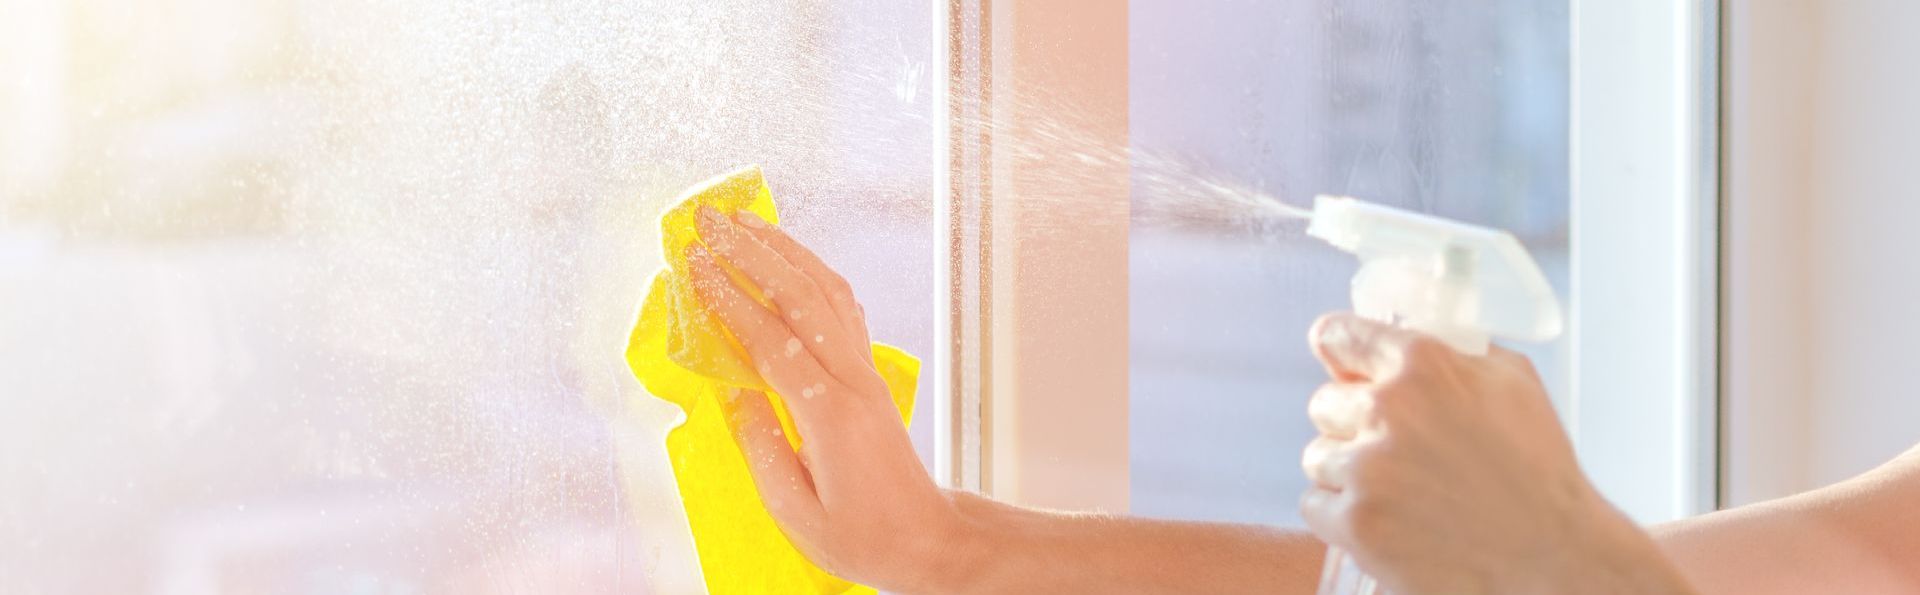 a person is cleaning a window with a spray bottle and a cloth